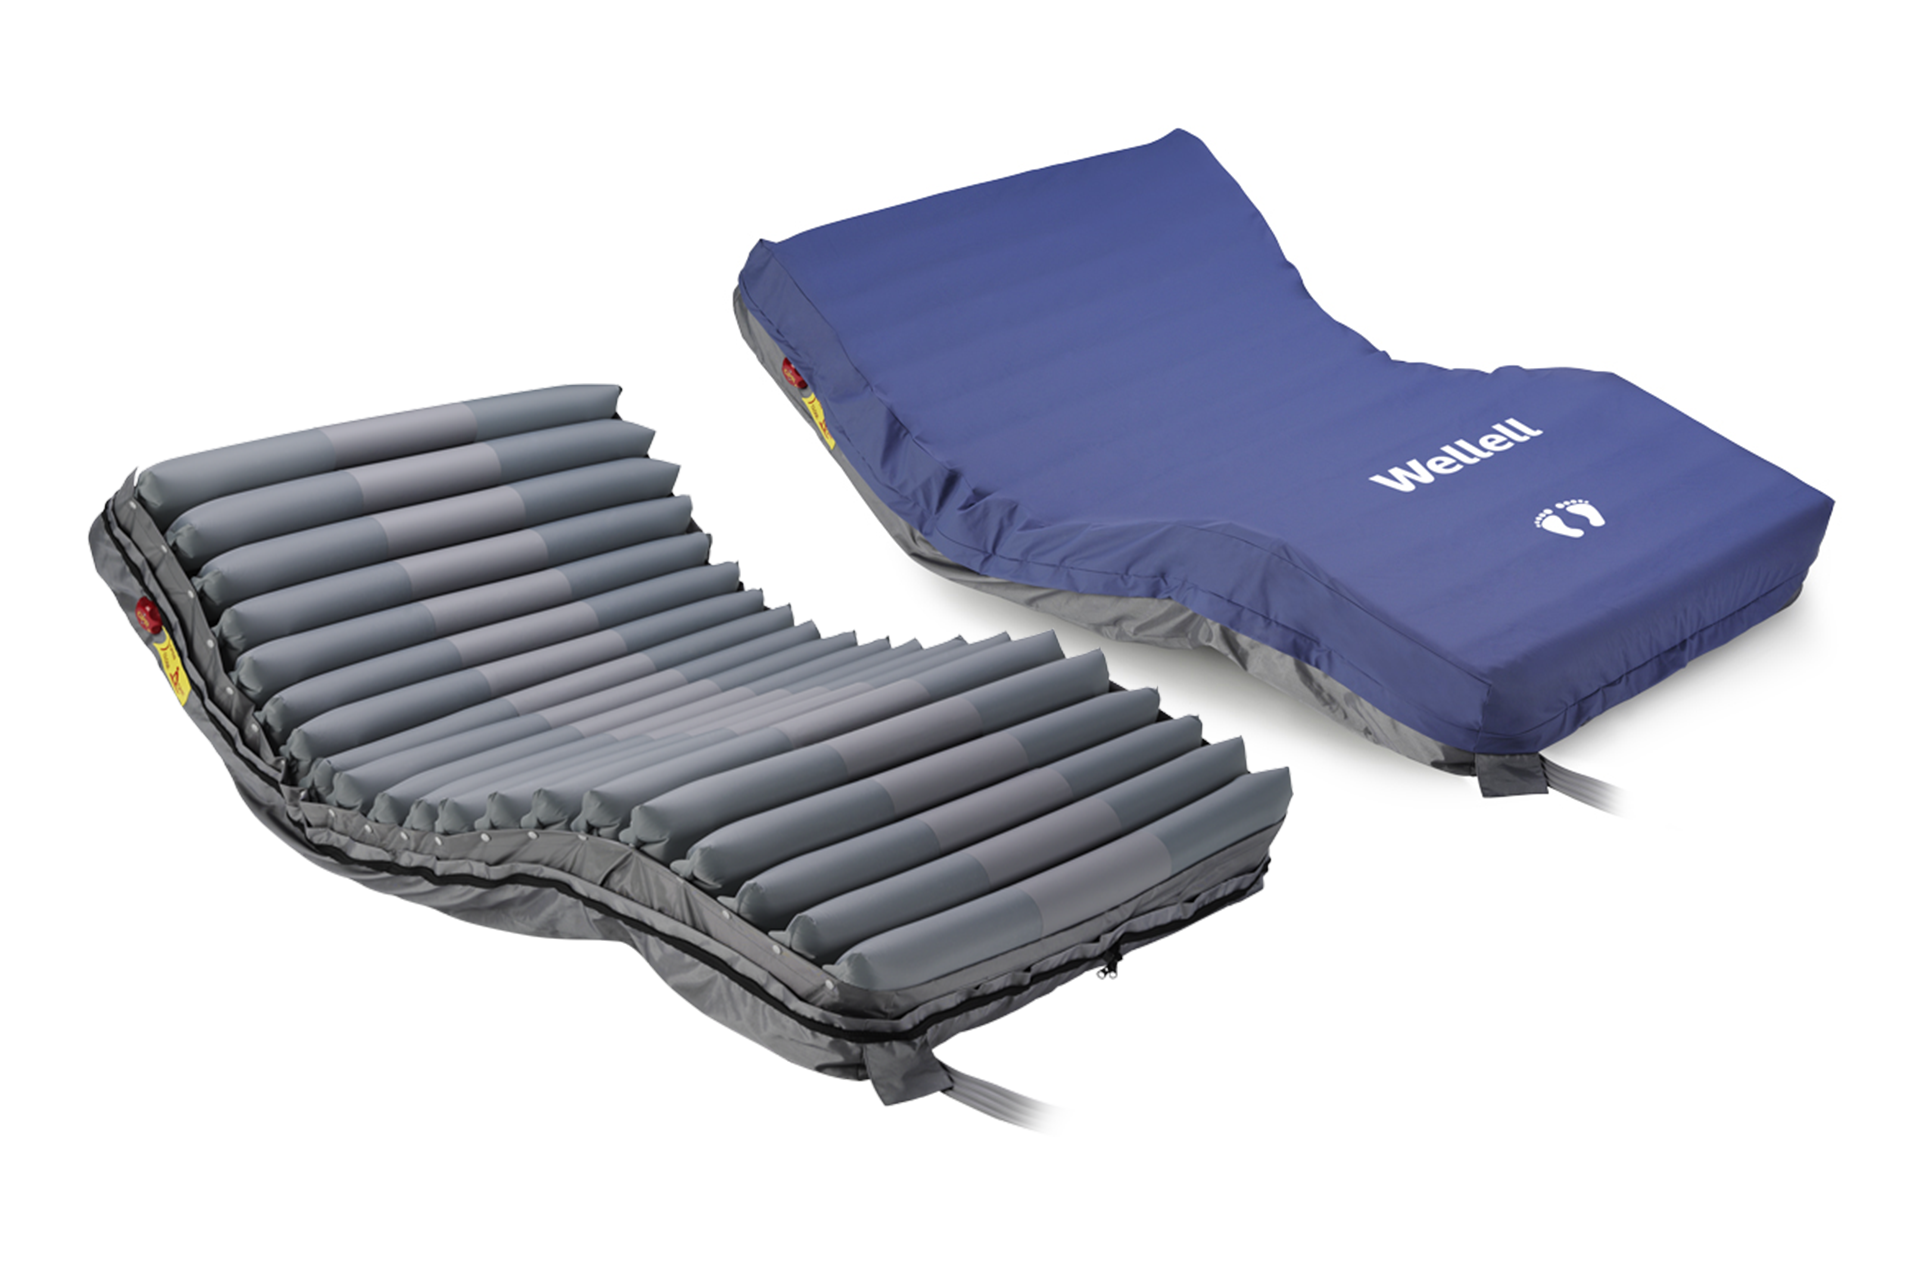 Pro-care Auto Bariatric  Wellell Medical Bed - ES Wellell